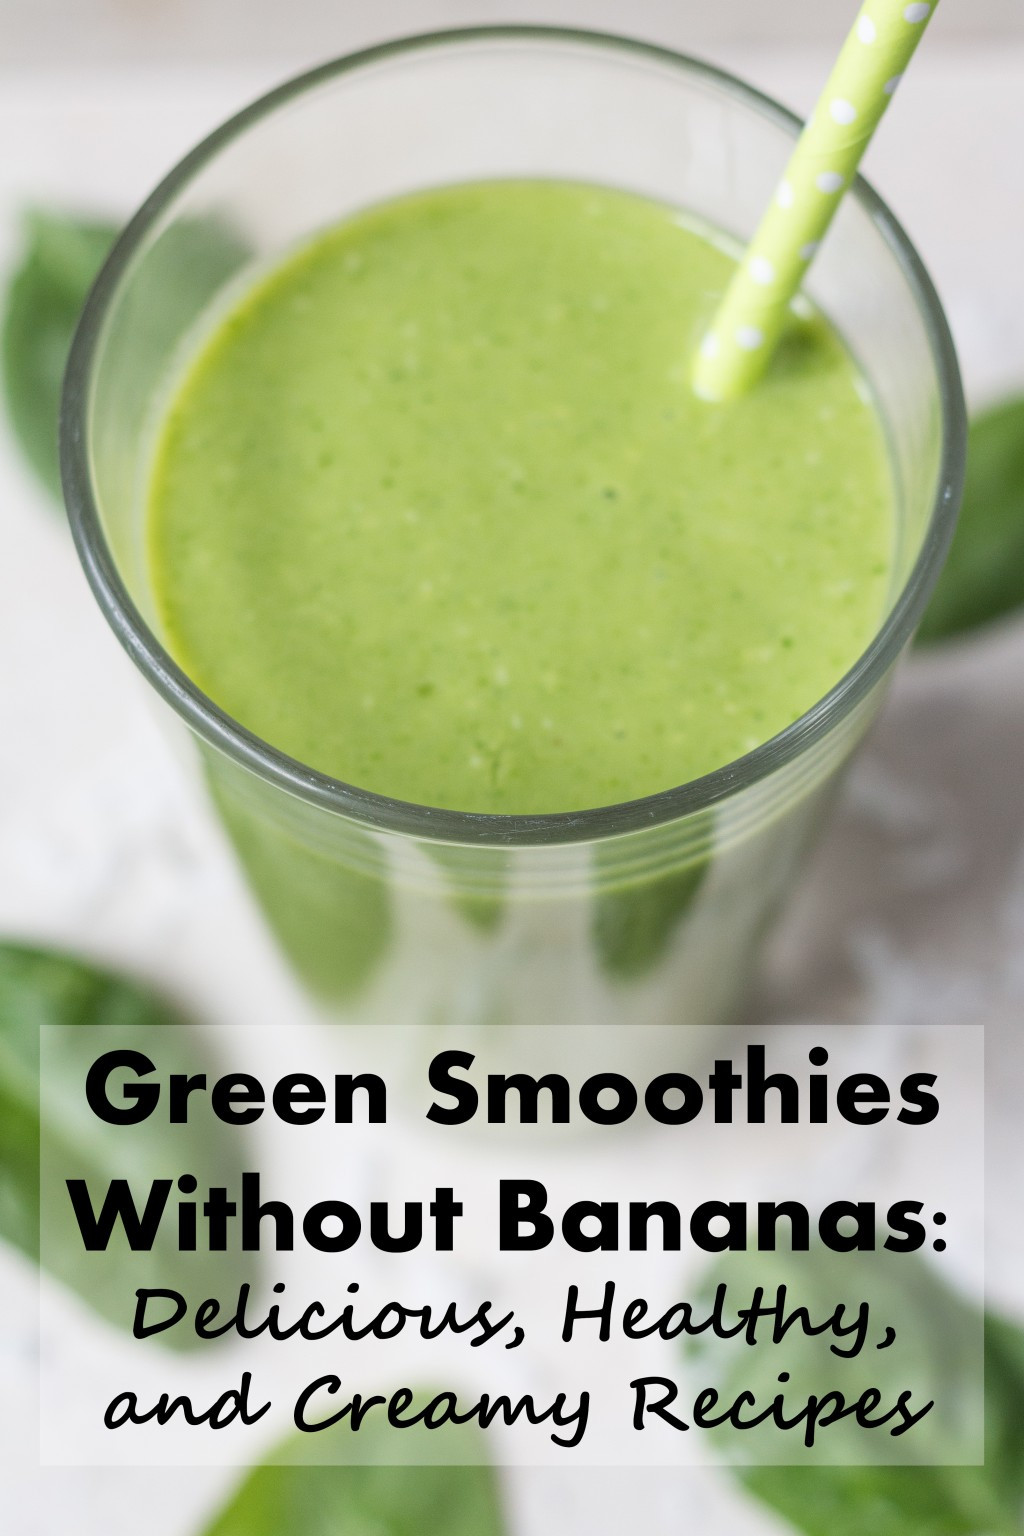 Green Smoothies Recipes
 Delicious Healthy and Creamy Green Smoothie Recipes